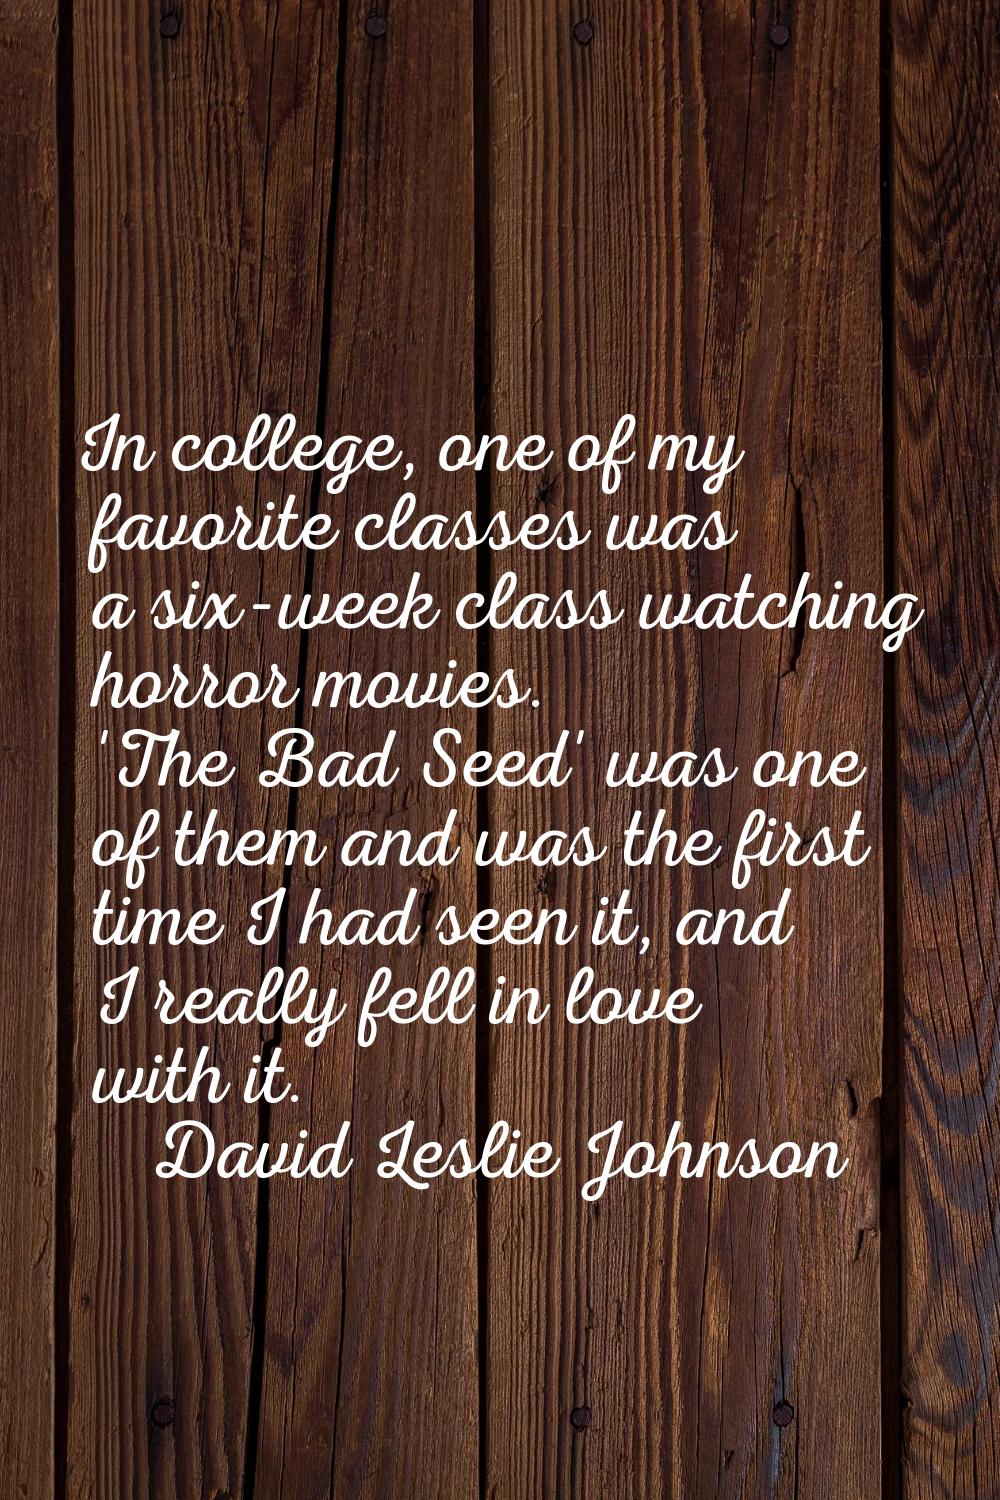 In college, one of my favorite classes was a six-week class watching horror movies. 'The Bad Seed' 